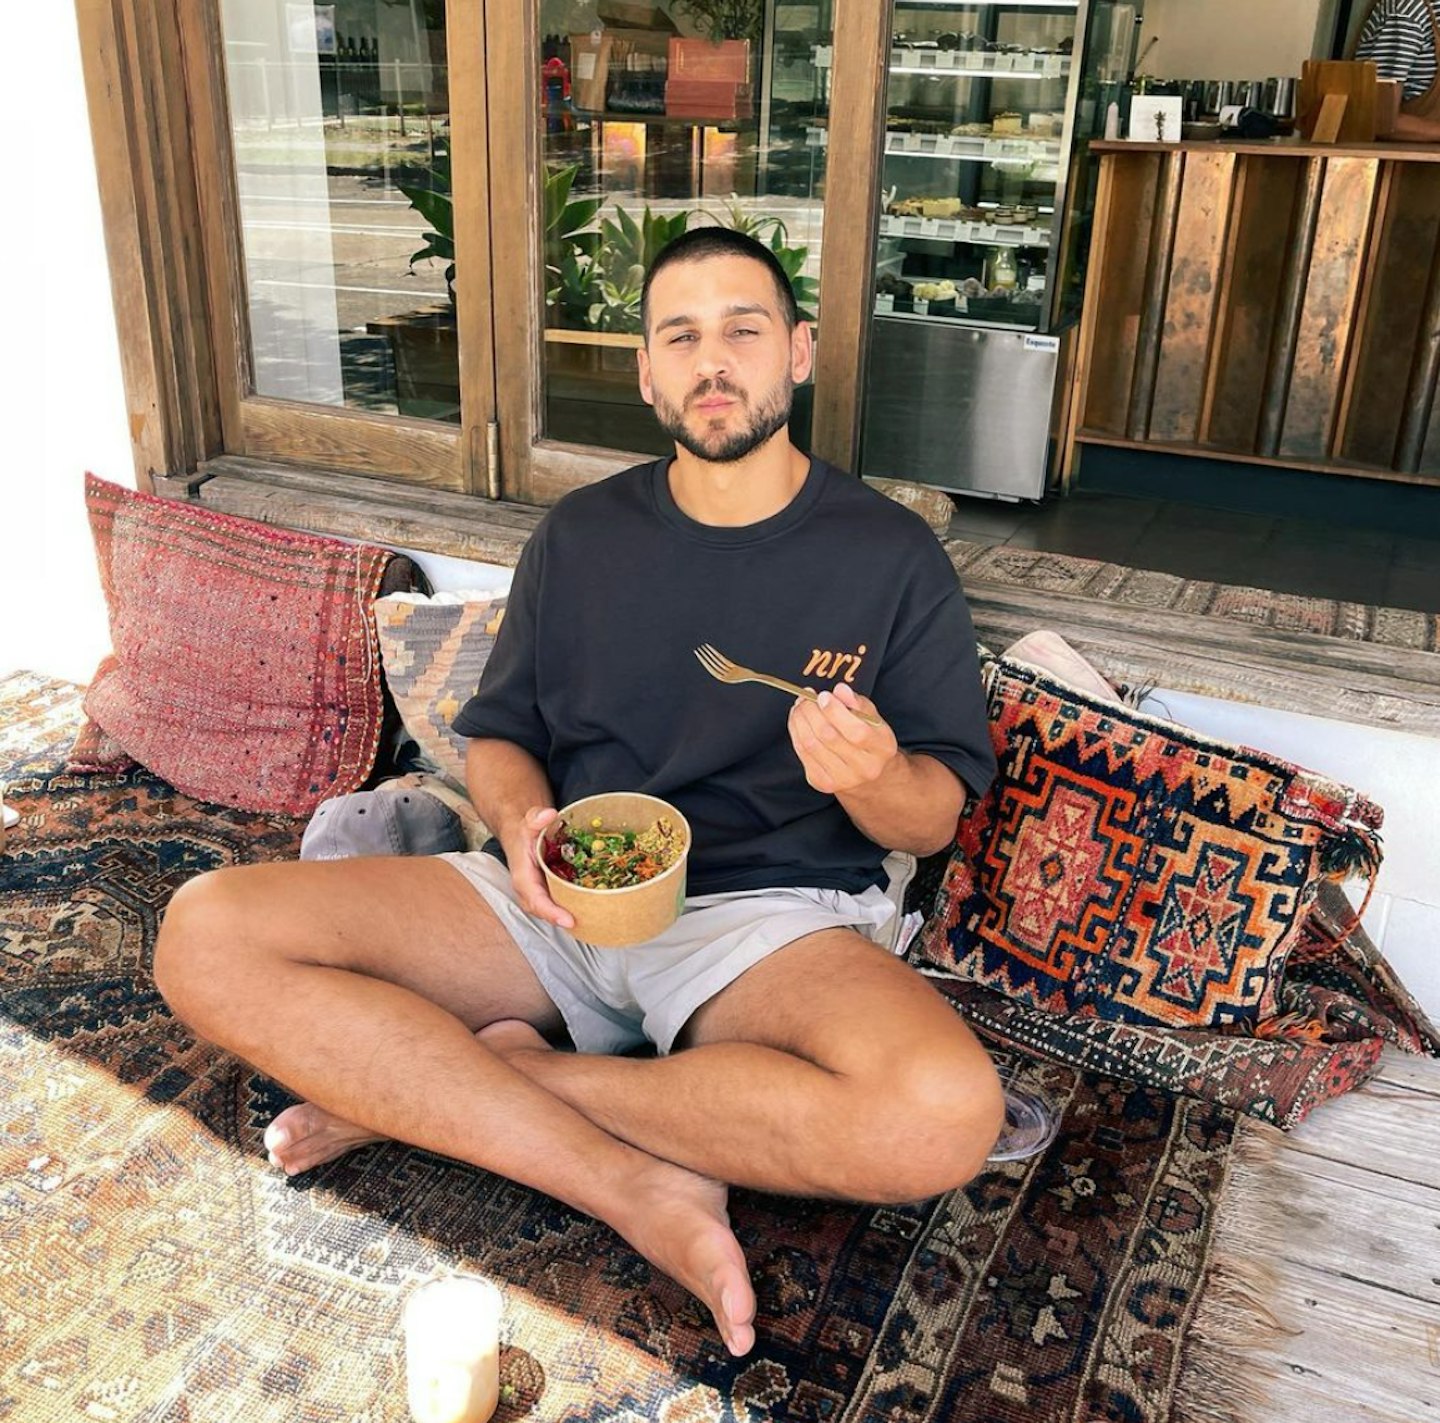 Michael Brunelli poses for instagram post with salad bowl promoting healthy lifestyle